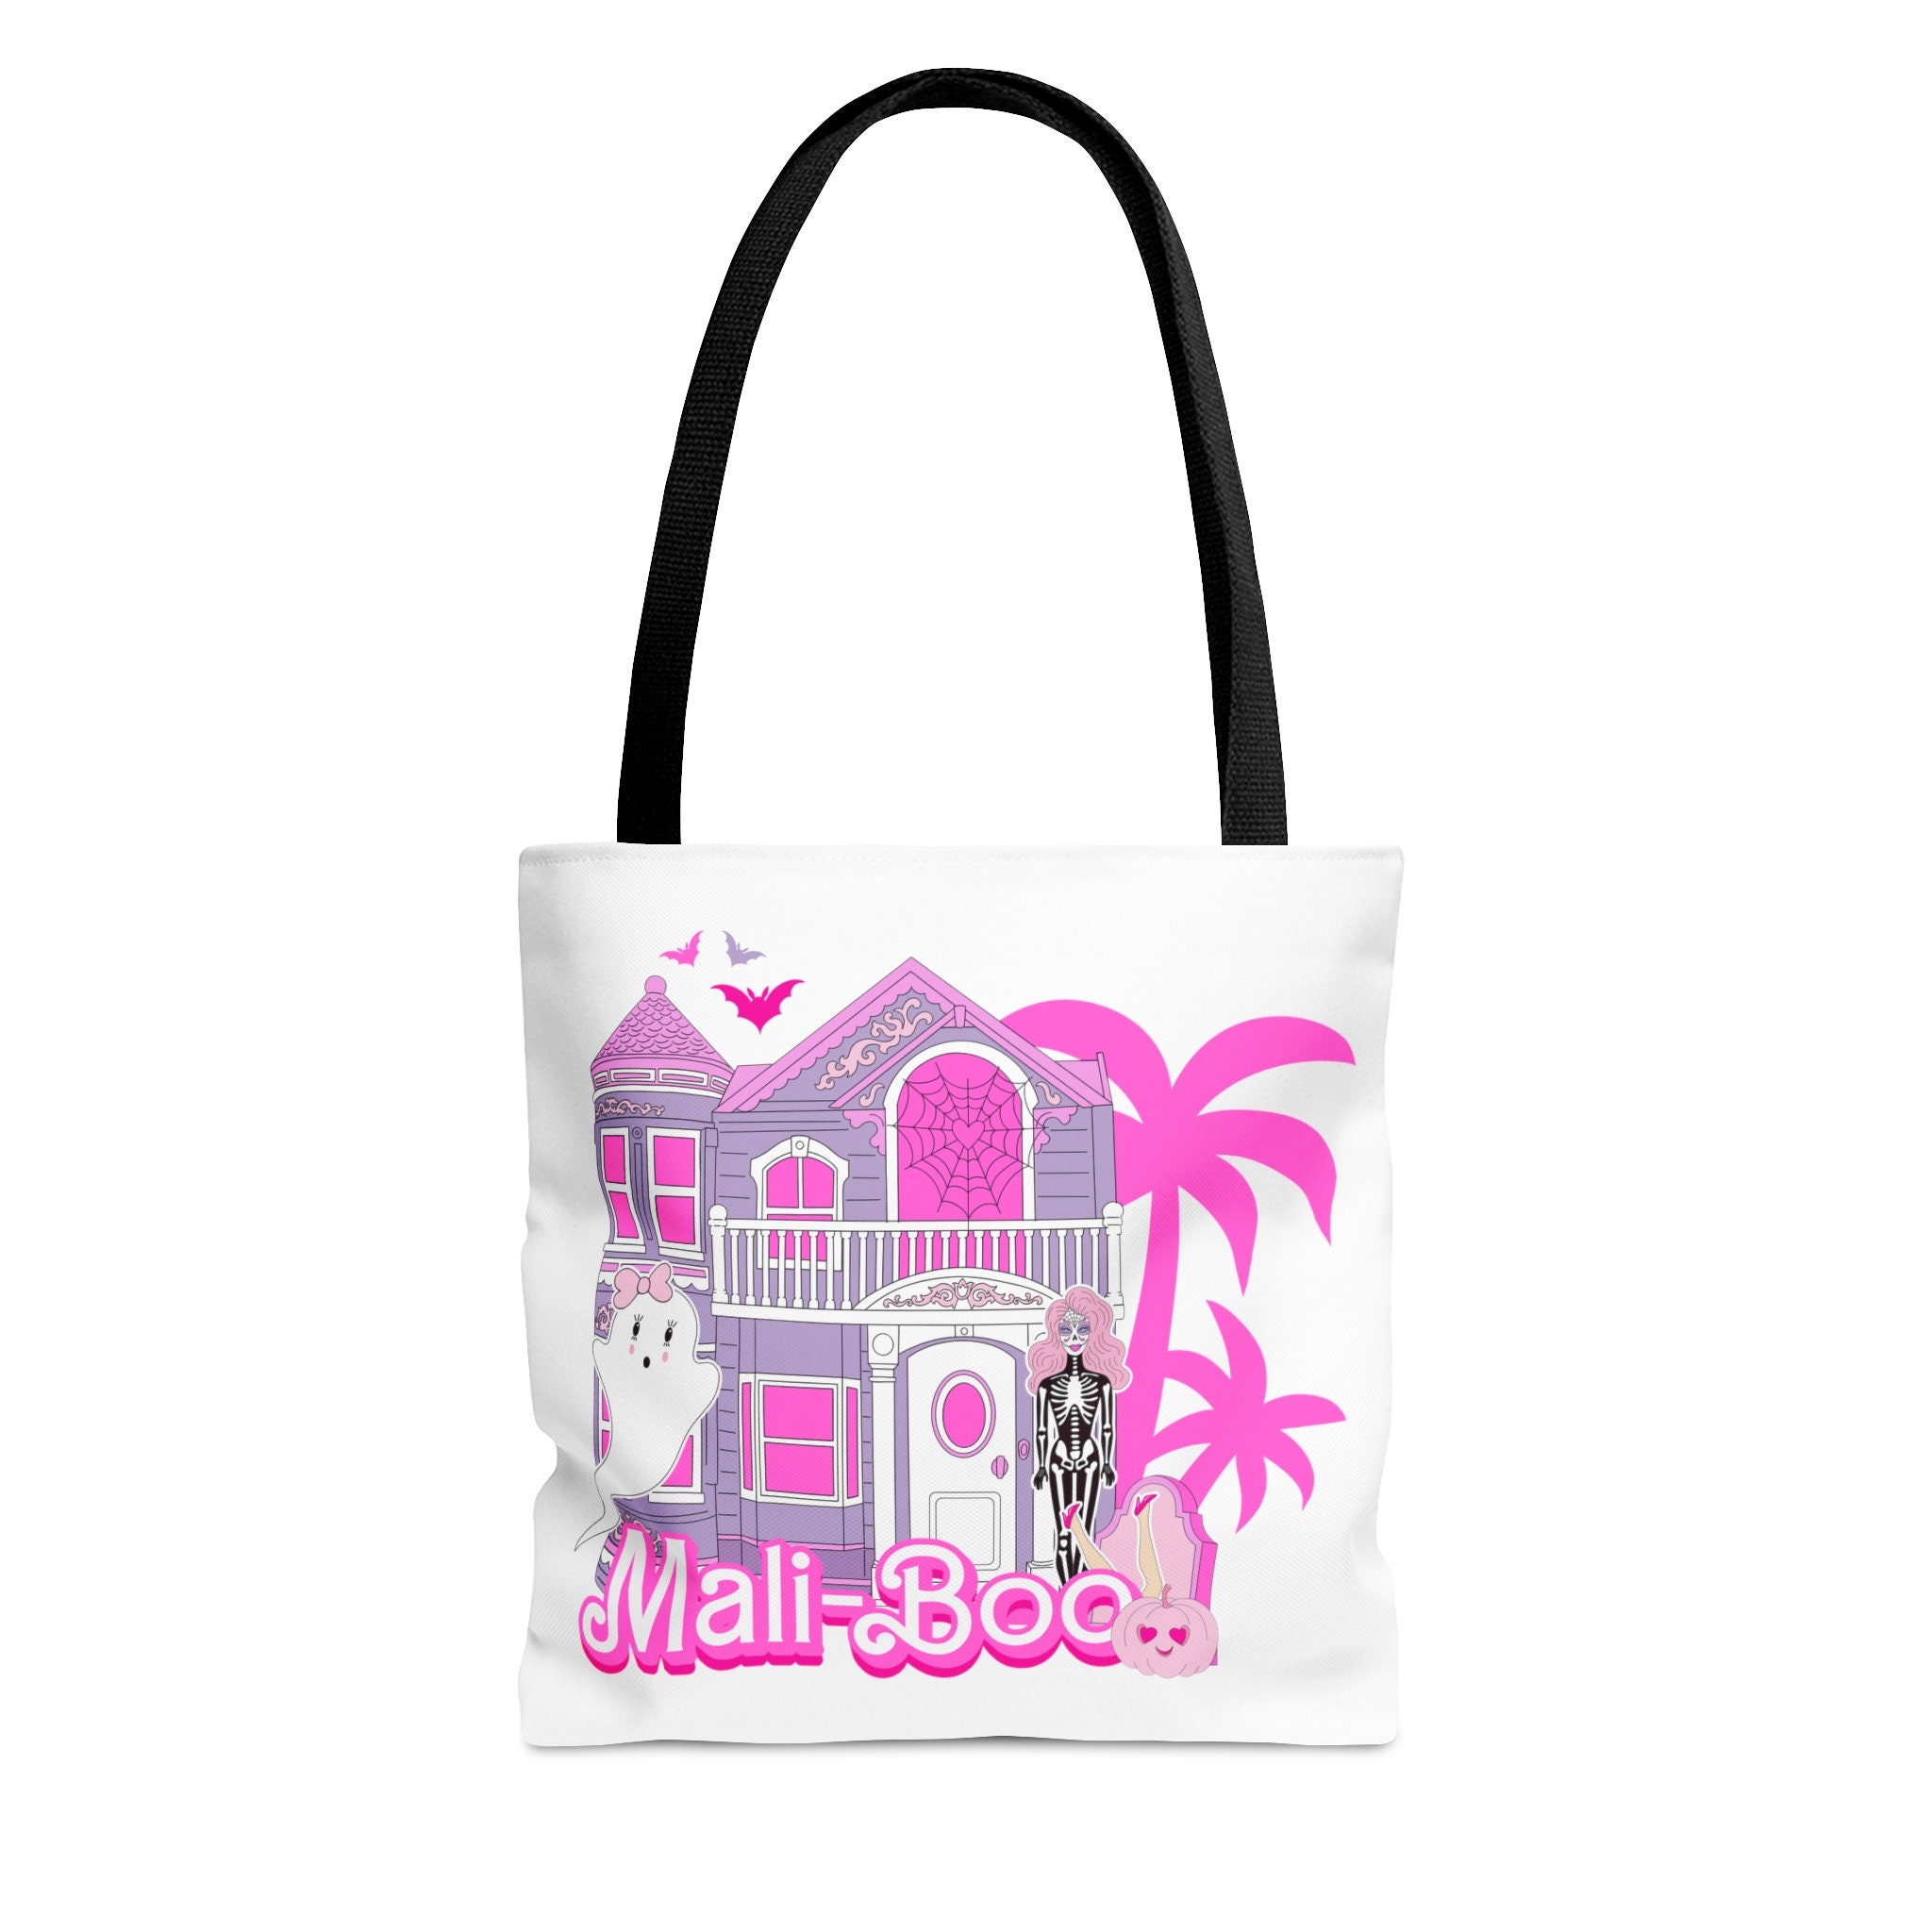 Boohoo - Barbie Printed Tote Bag - neon-pink - Size One Size